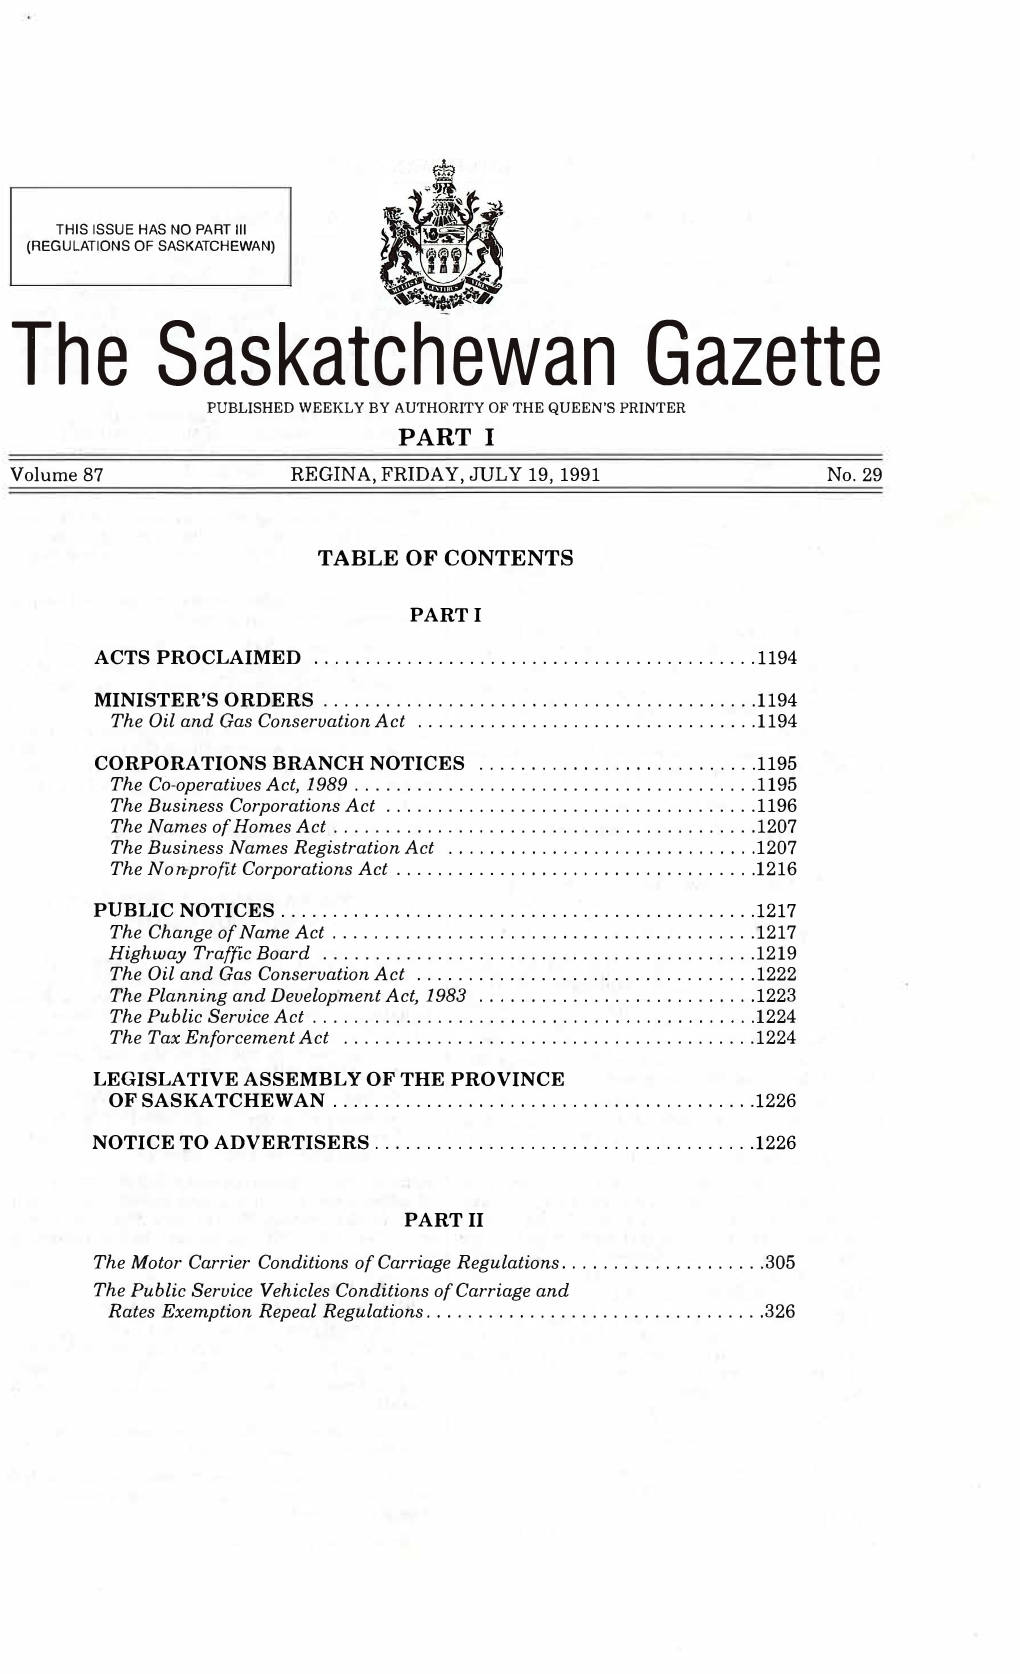 The Saskatchewan Gazette PUBLISHED WEEKLY by AUTHORITY of the QUEEN's PRINTER PART I Volume 87 REGINA, FRIDAY, JULY19, 1991 No